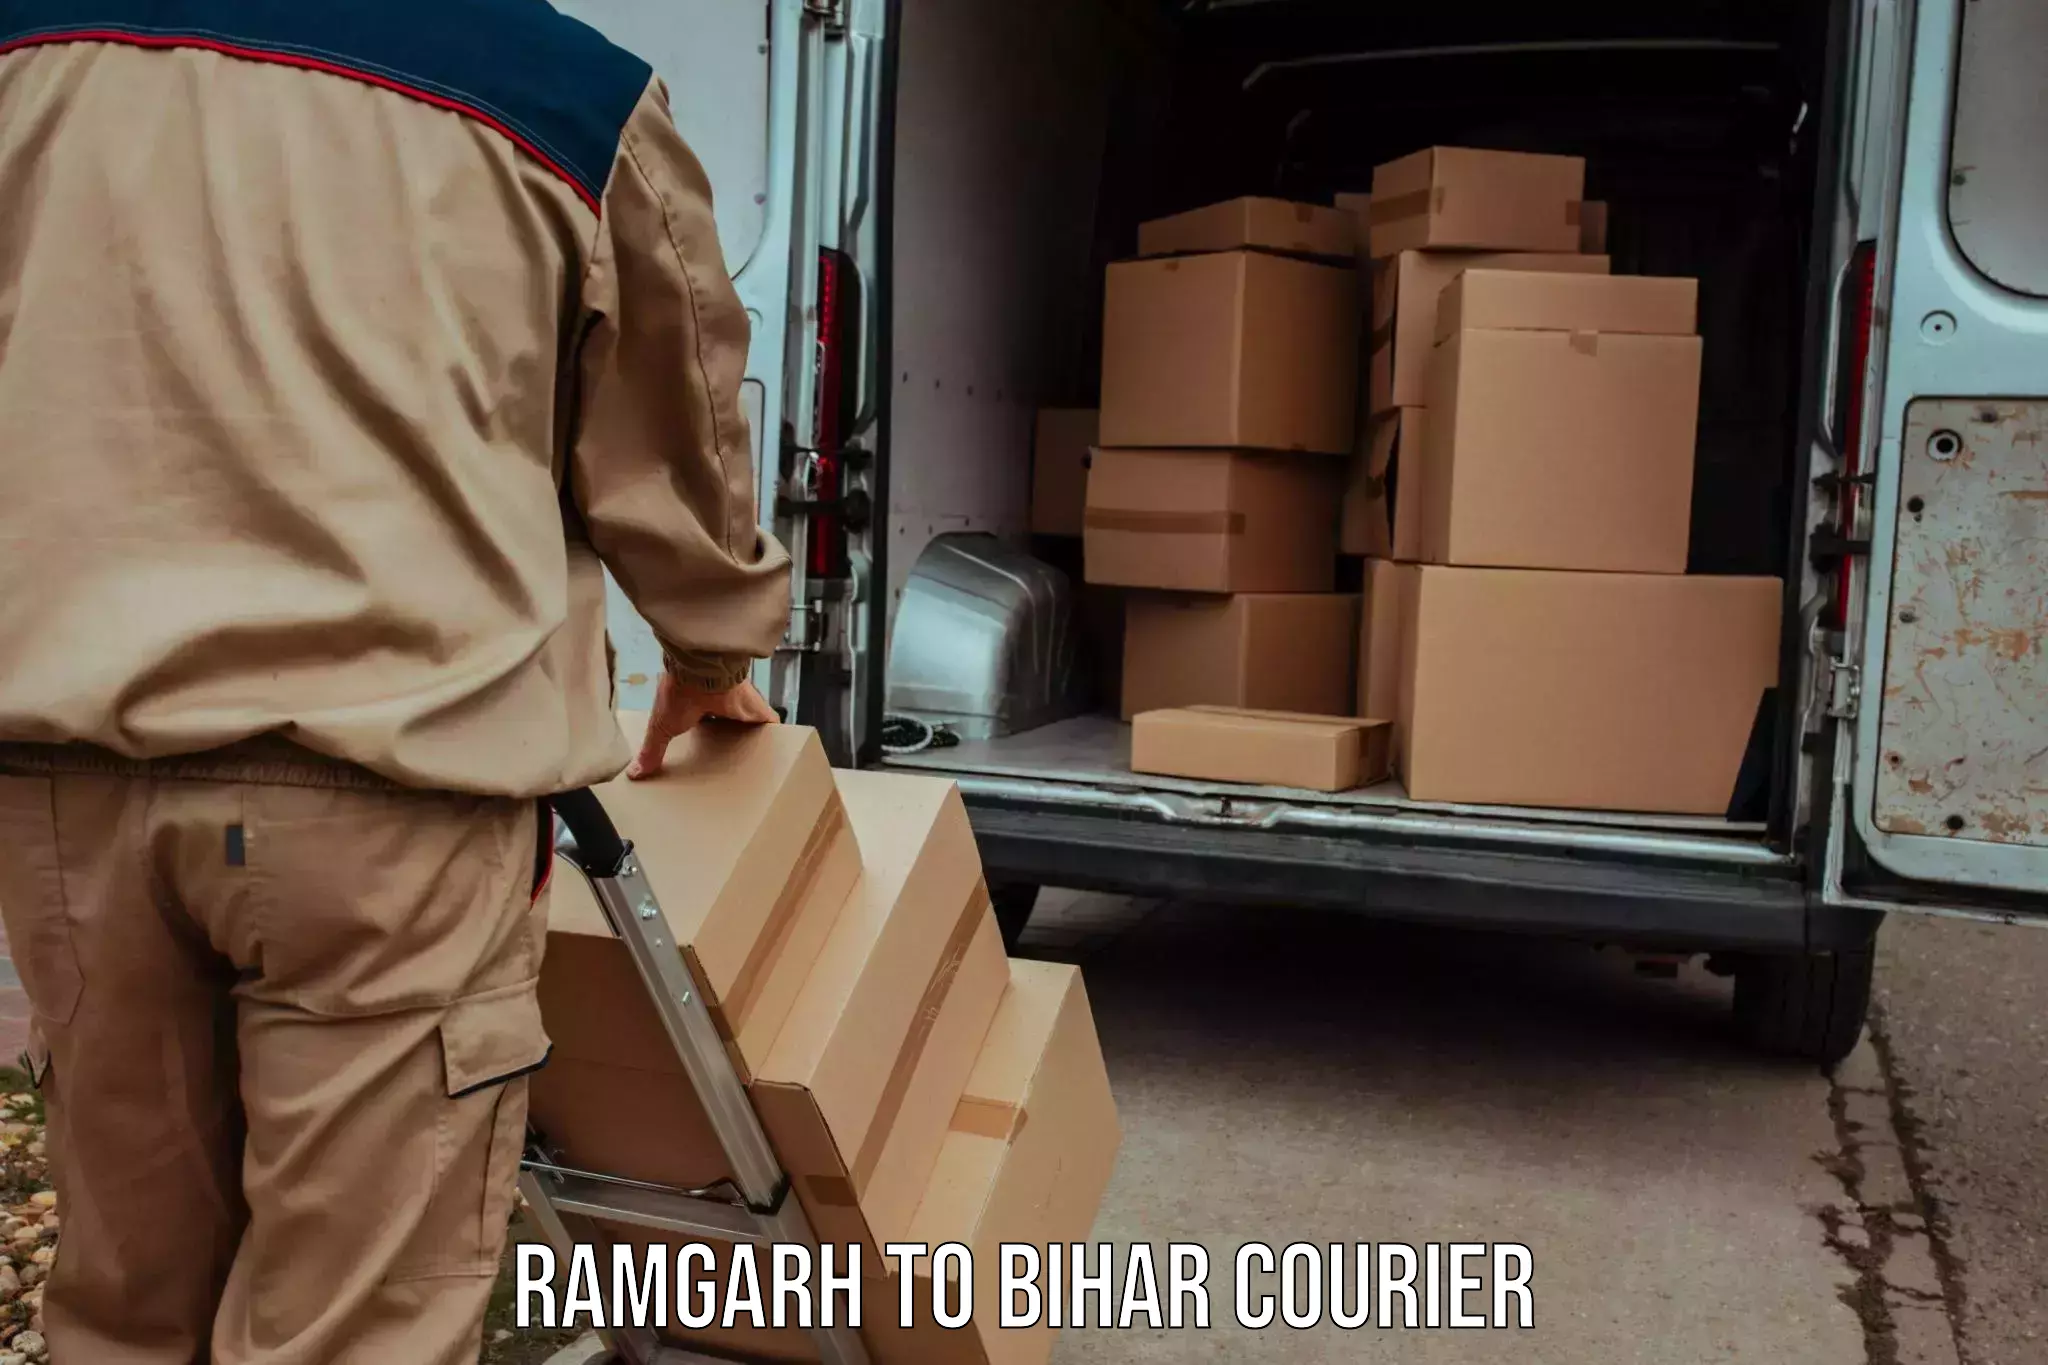 Courier service booking Ramgarh to Bihar